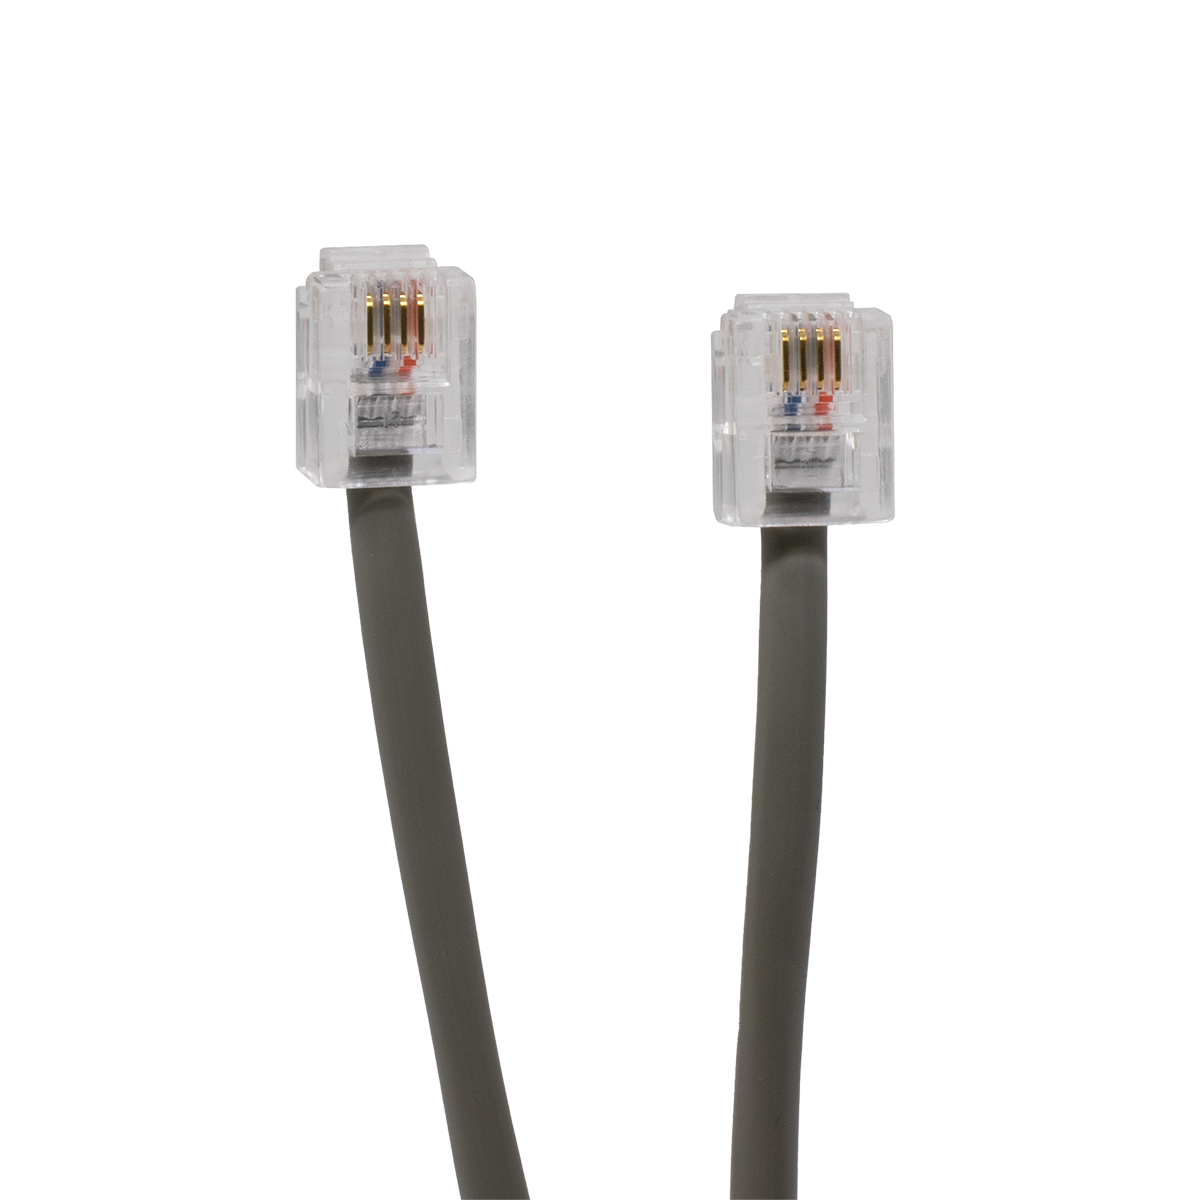 2 Pair 15' Solid Wire Cord (Plug View)